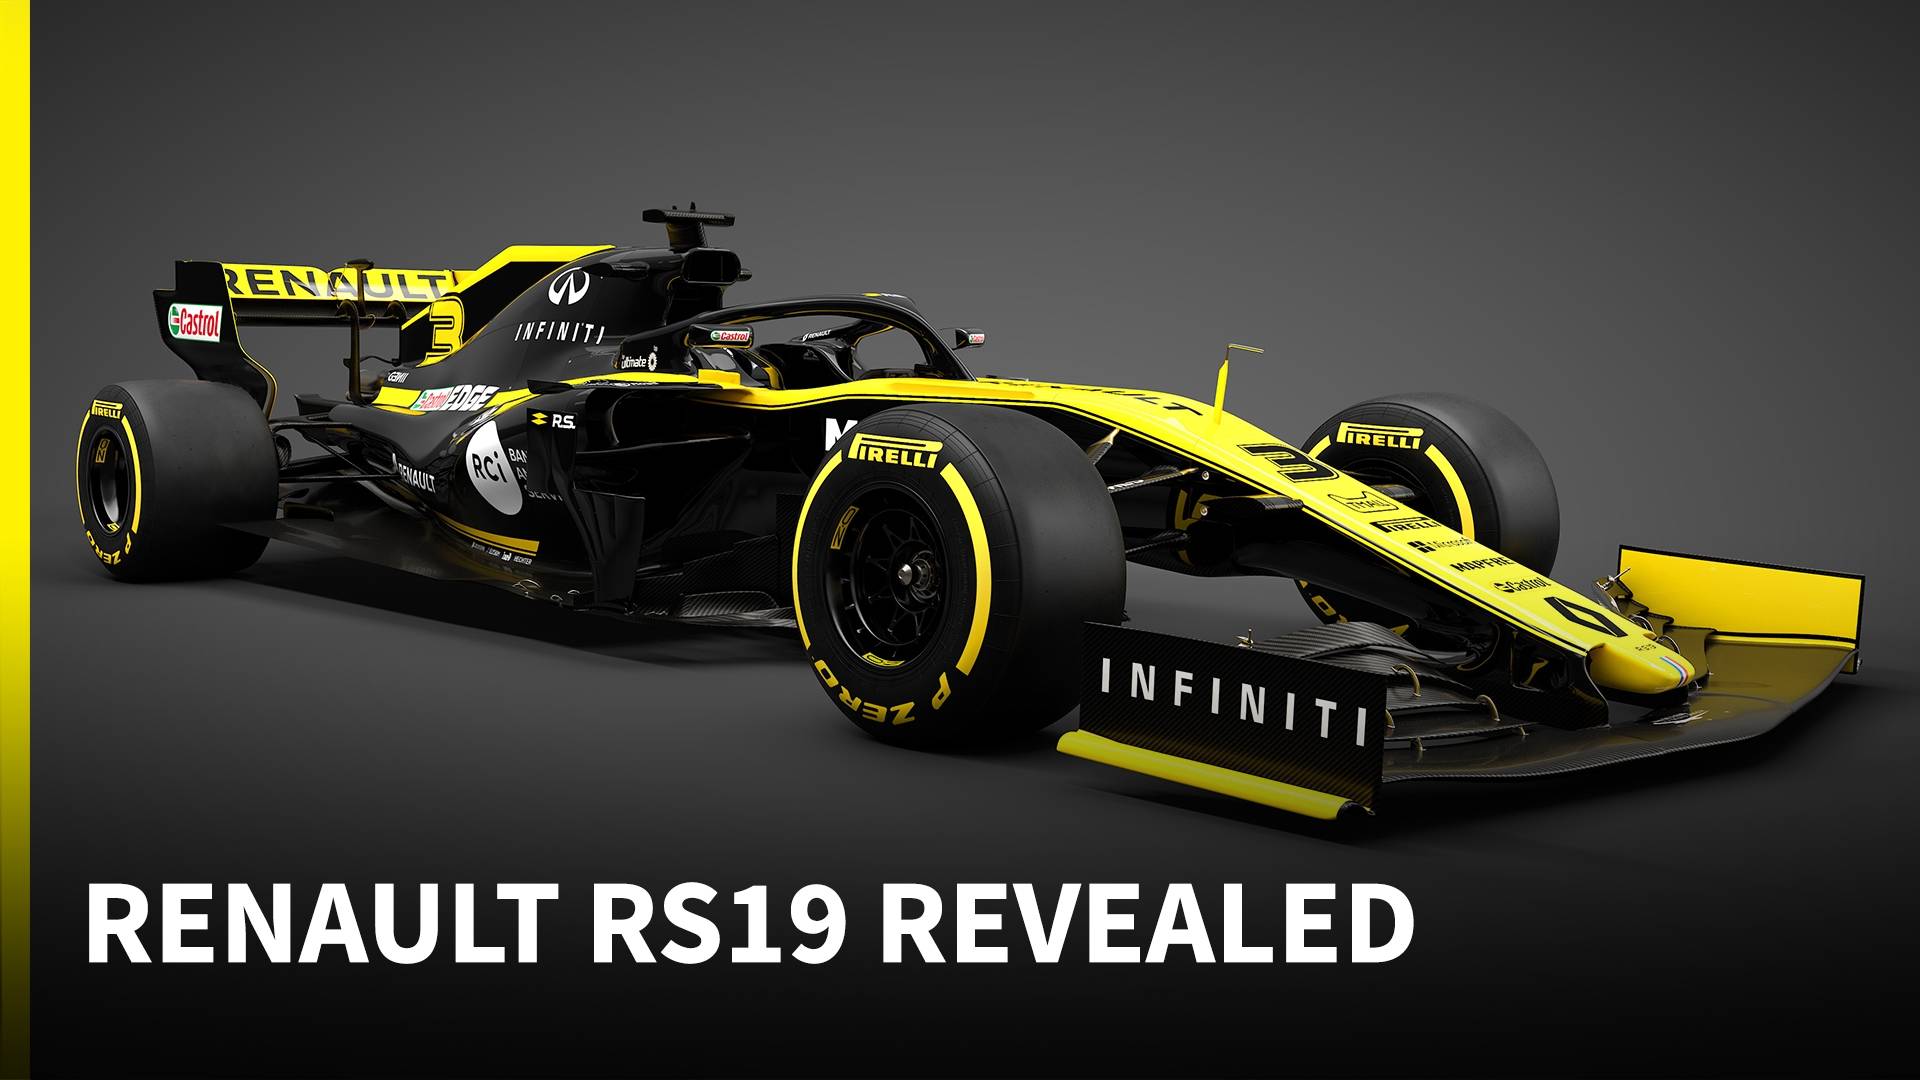 Renault's 2019 hinges on what it hasn't shown 1 Videos